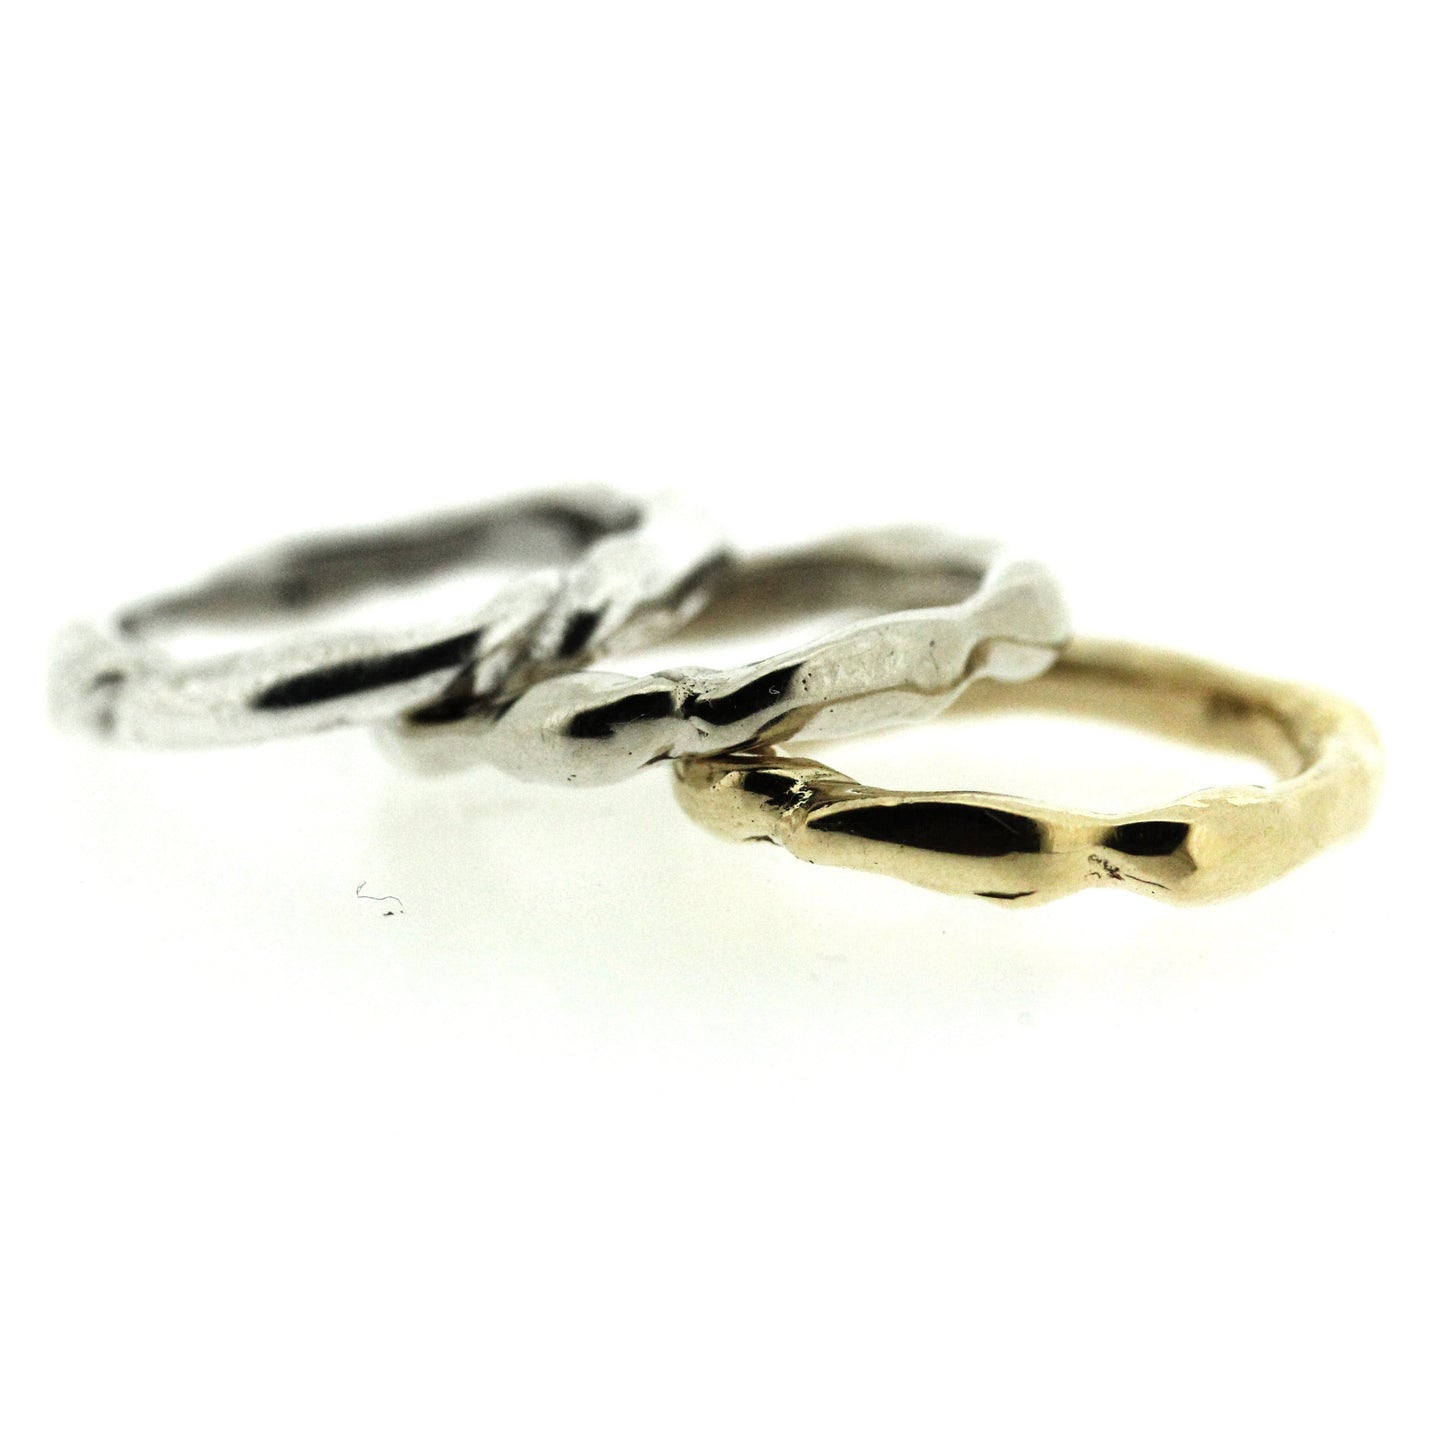 Full view of silver, white gold, and yellow gold Surge Bands stacked on top of one another.